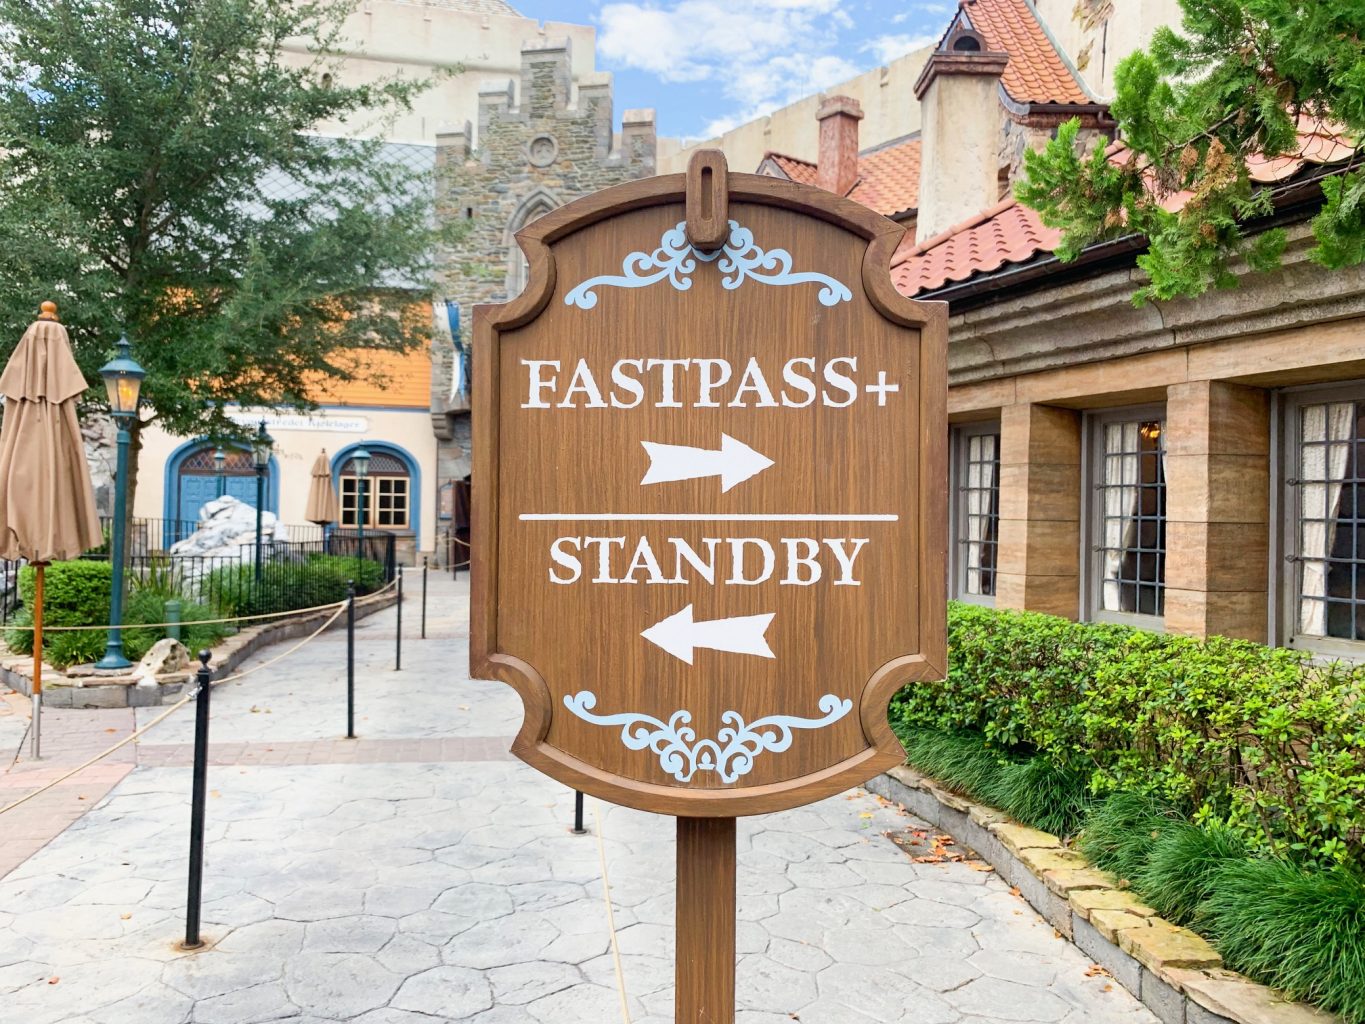 As Disney revamps FastPass, disabled access lawsuit goes on